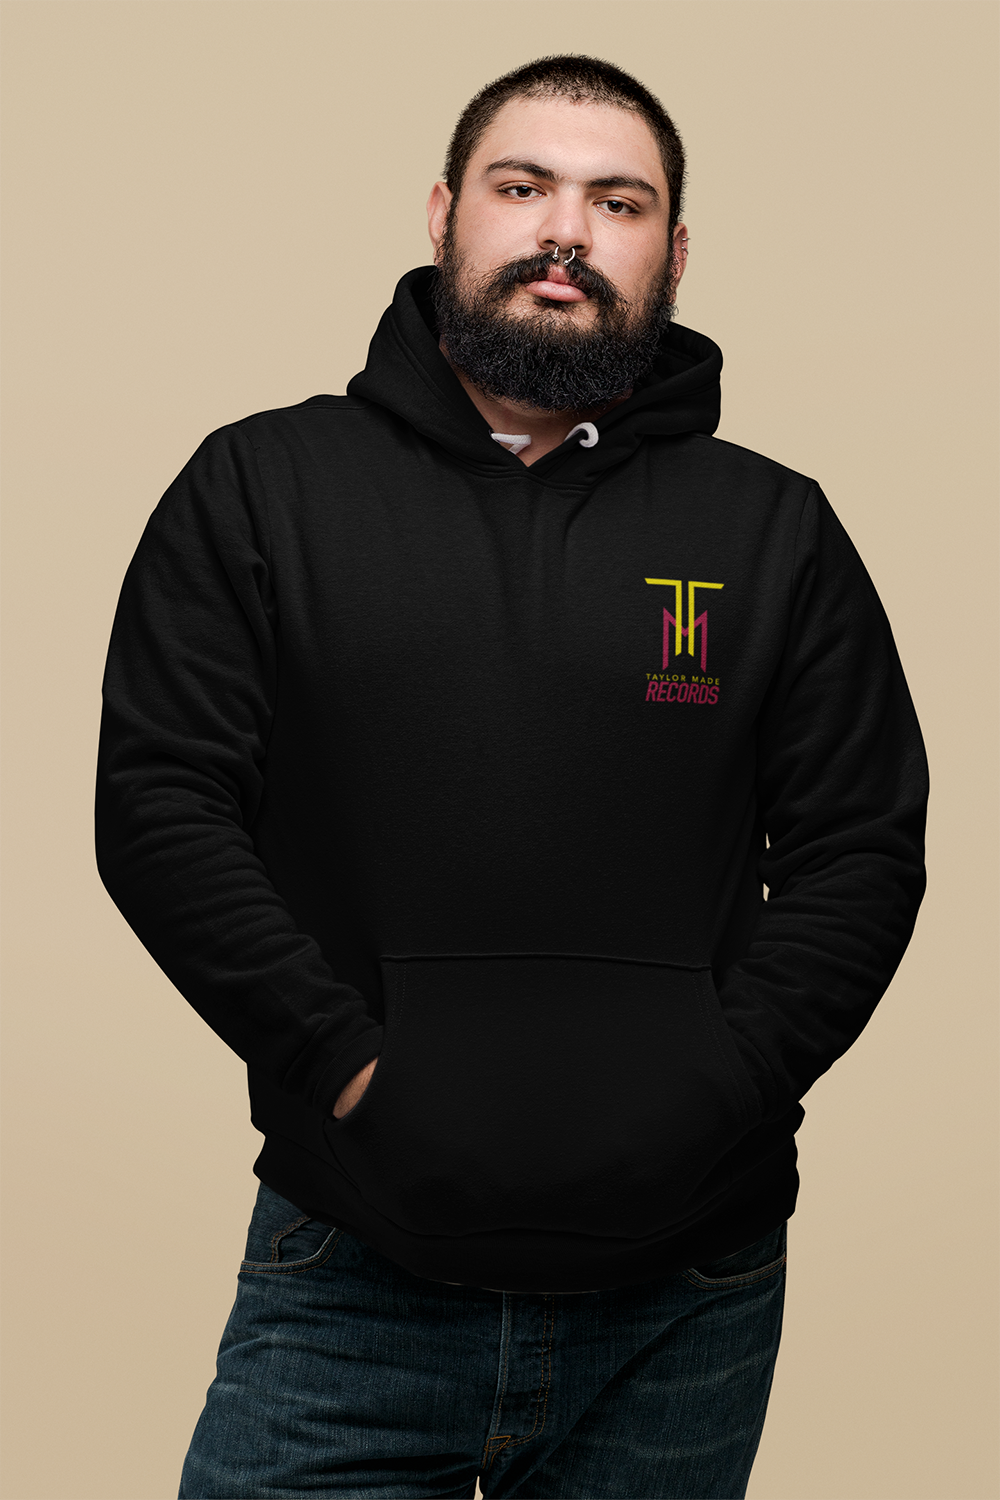 plus-size-hoodie-mockup-of-a-man-with-a-septum-piercing-against-a-flat-wall-27758.png